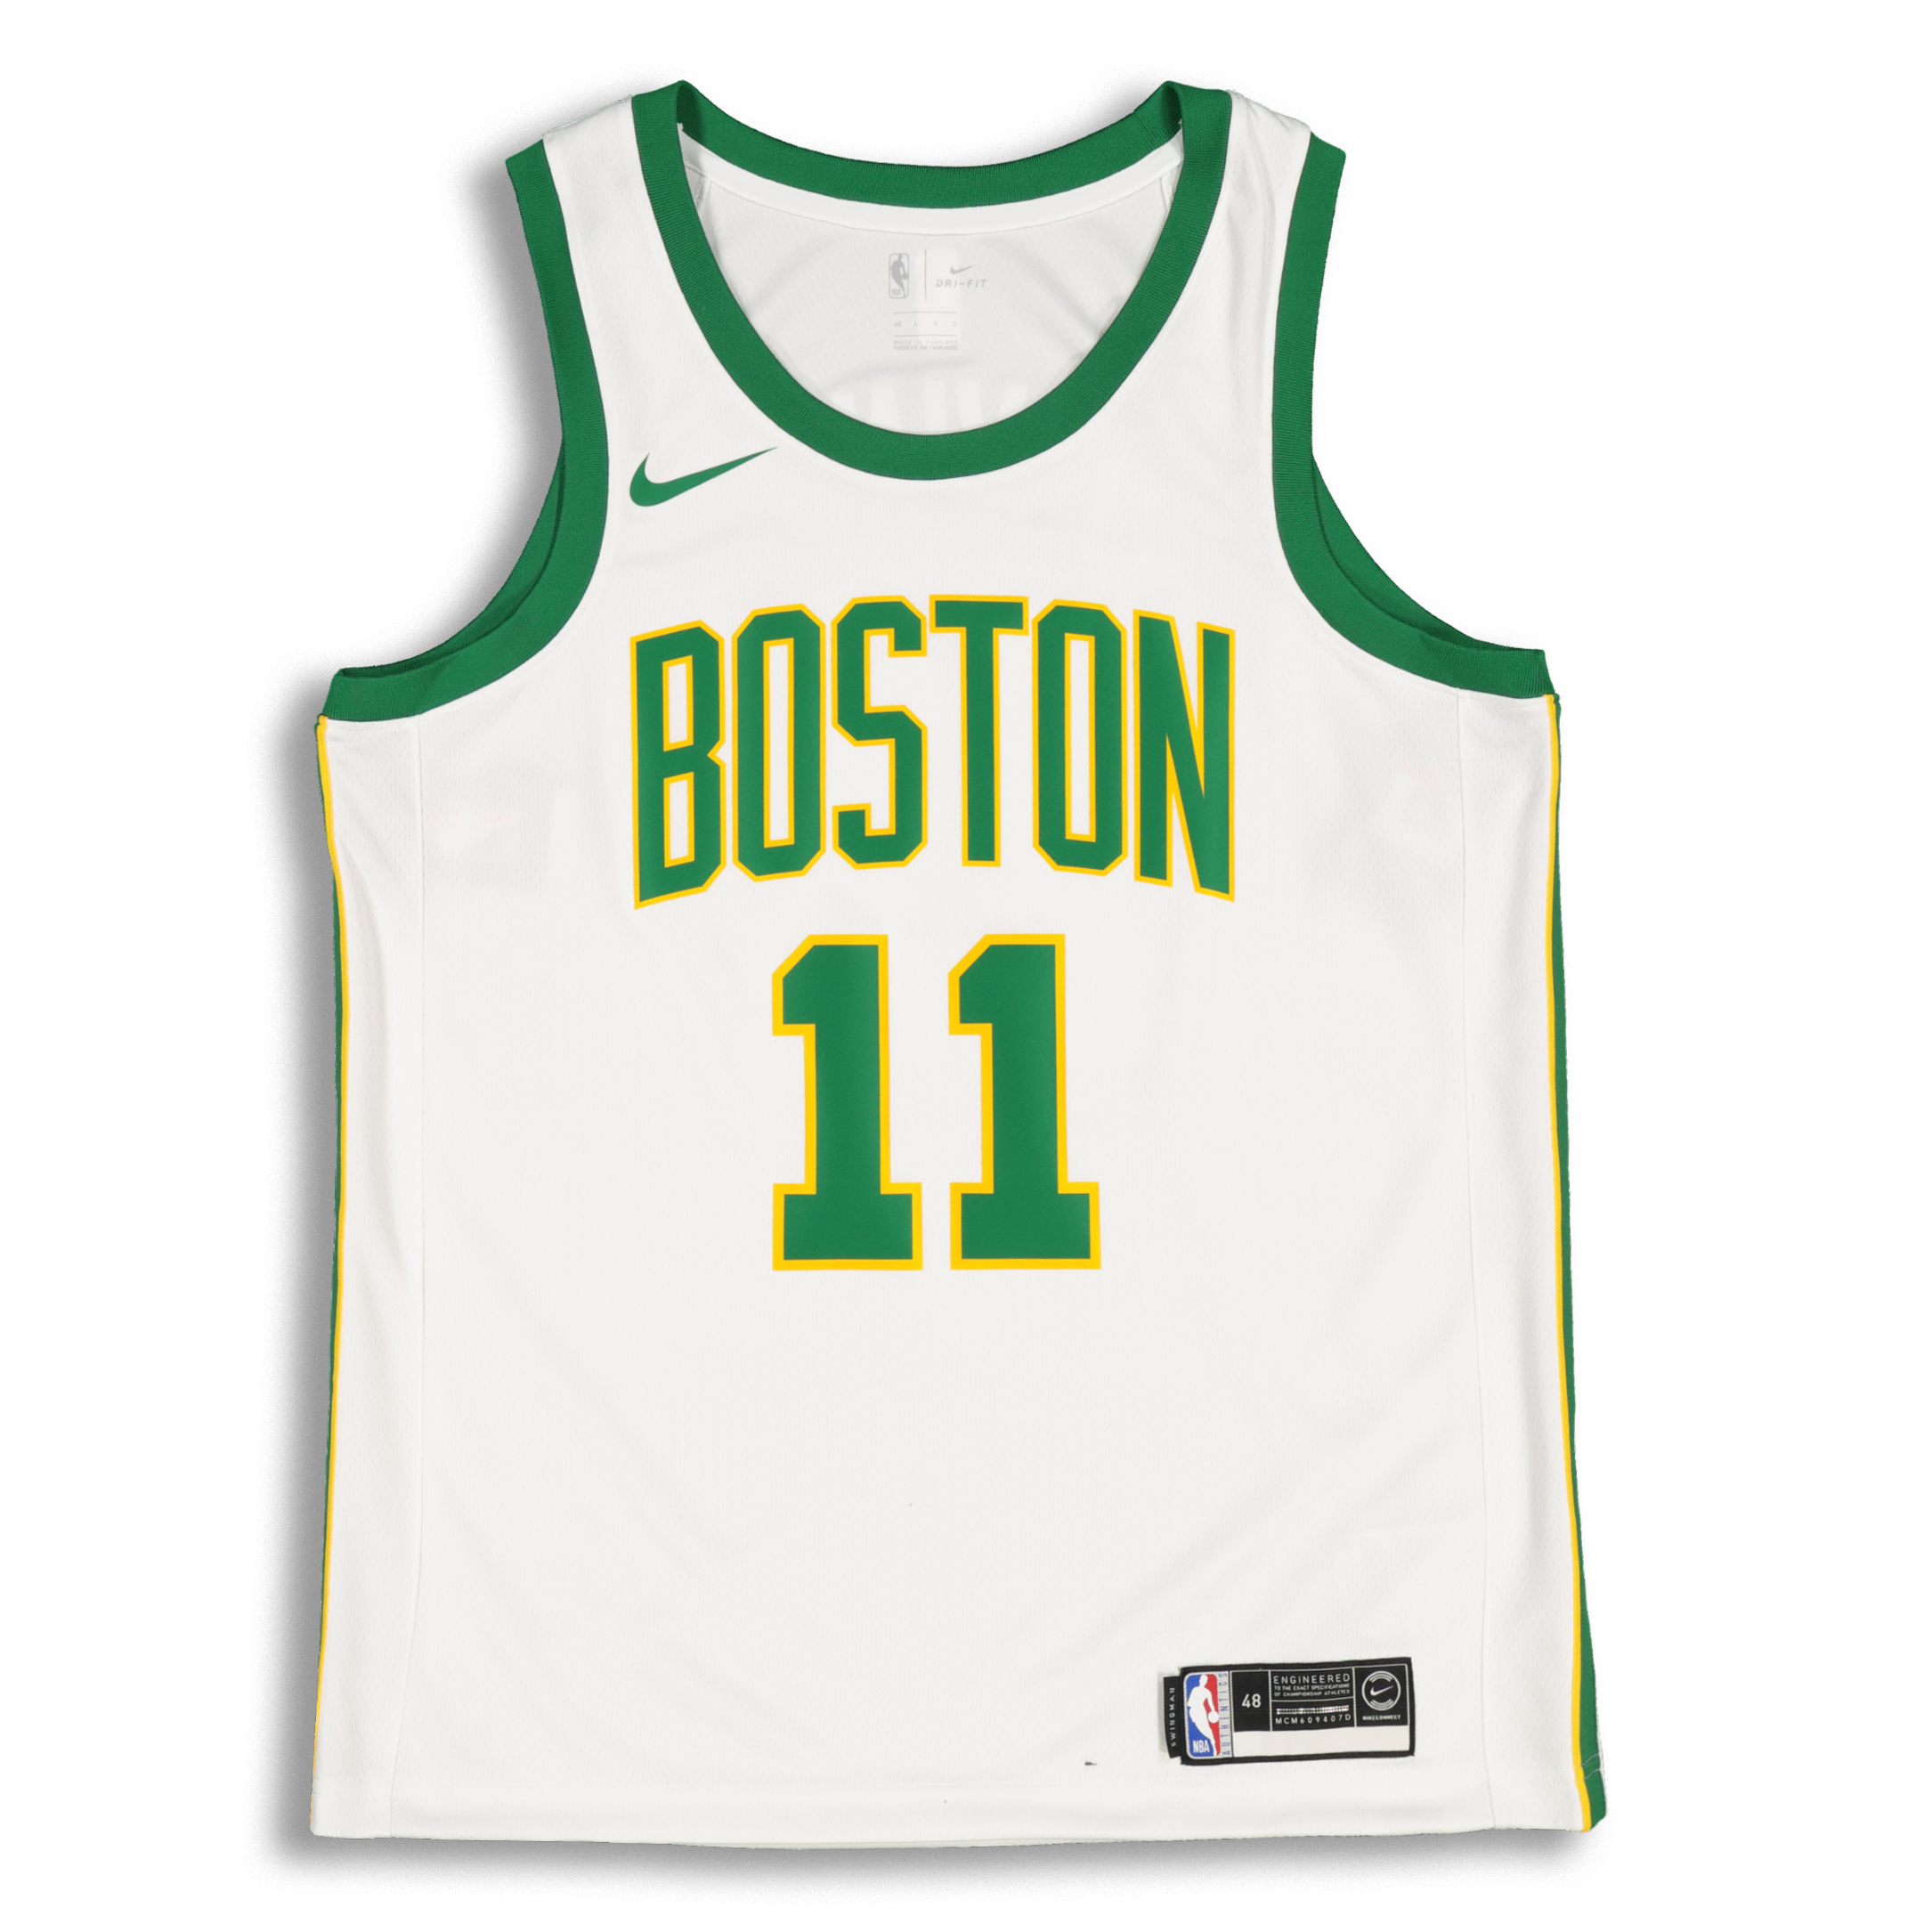 kyrie irving city edition authentic jersey